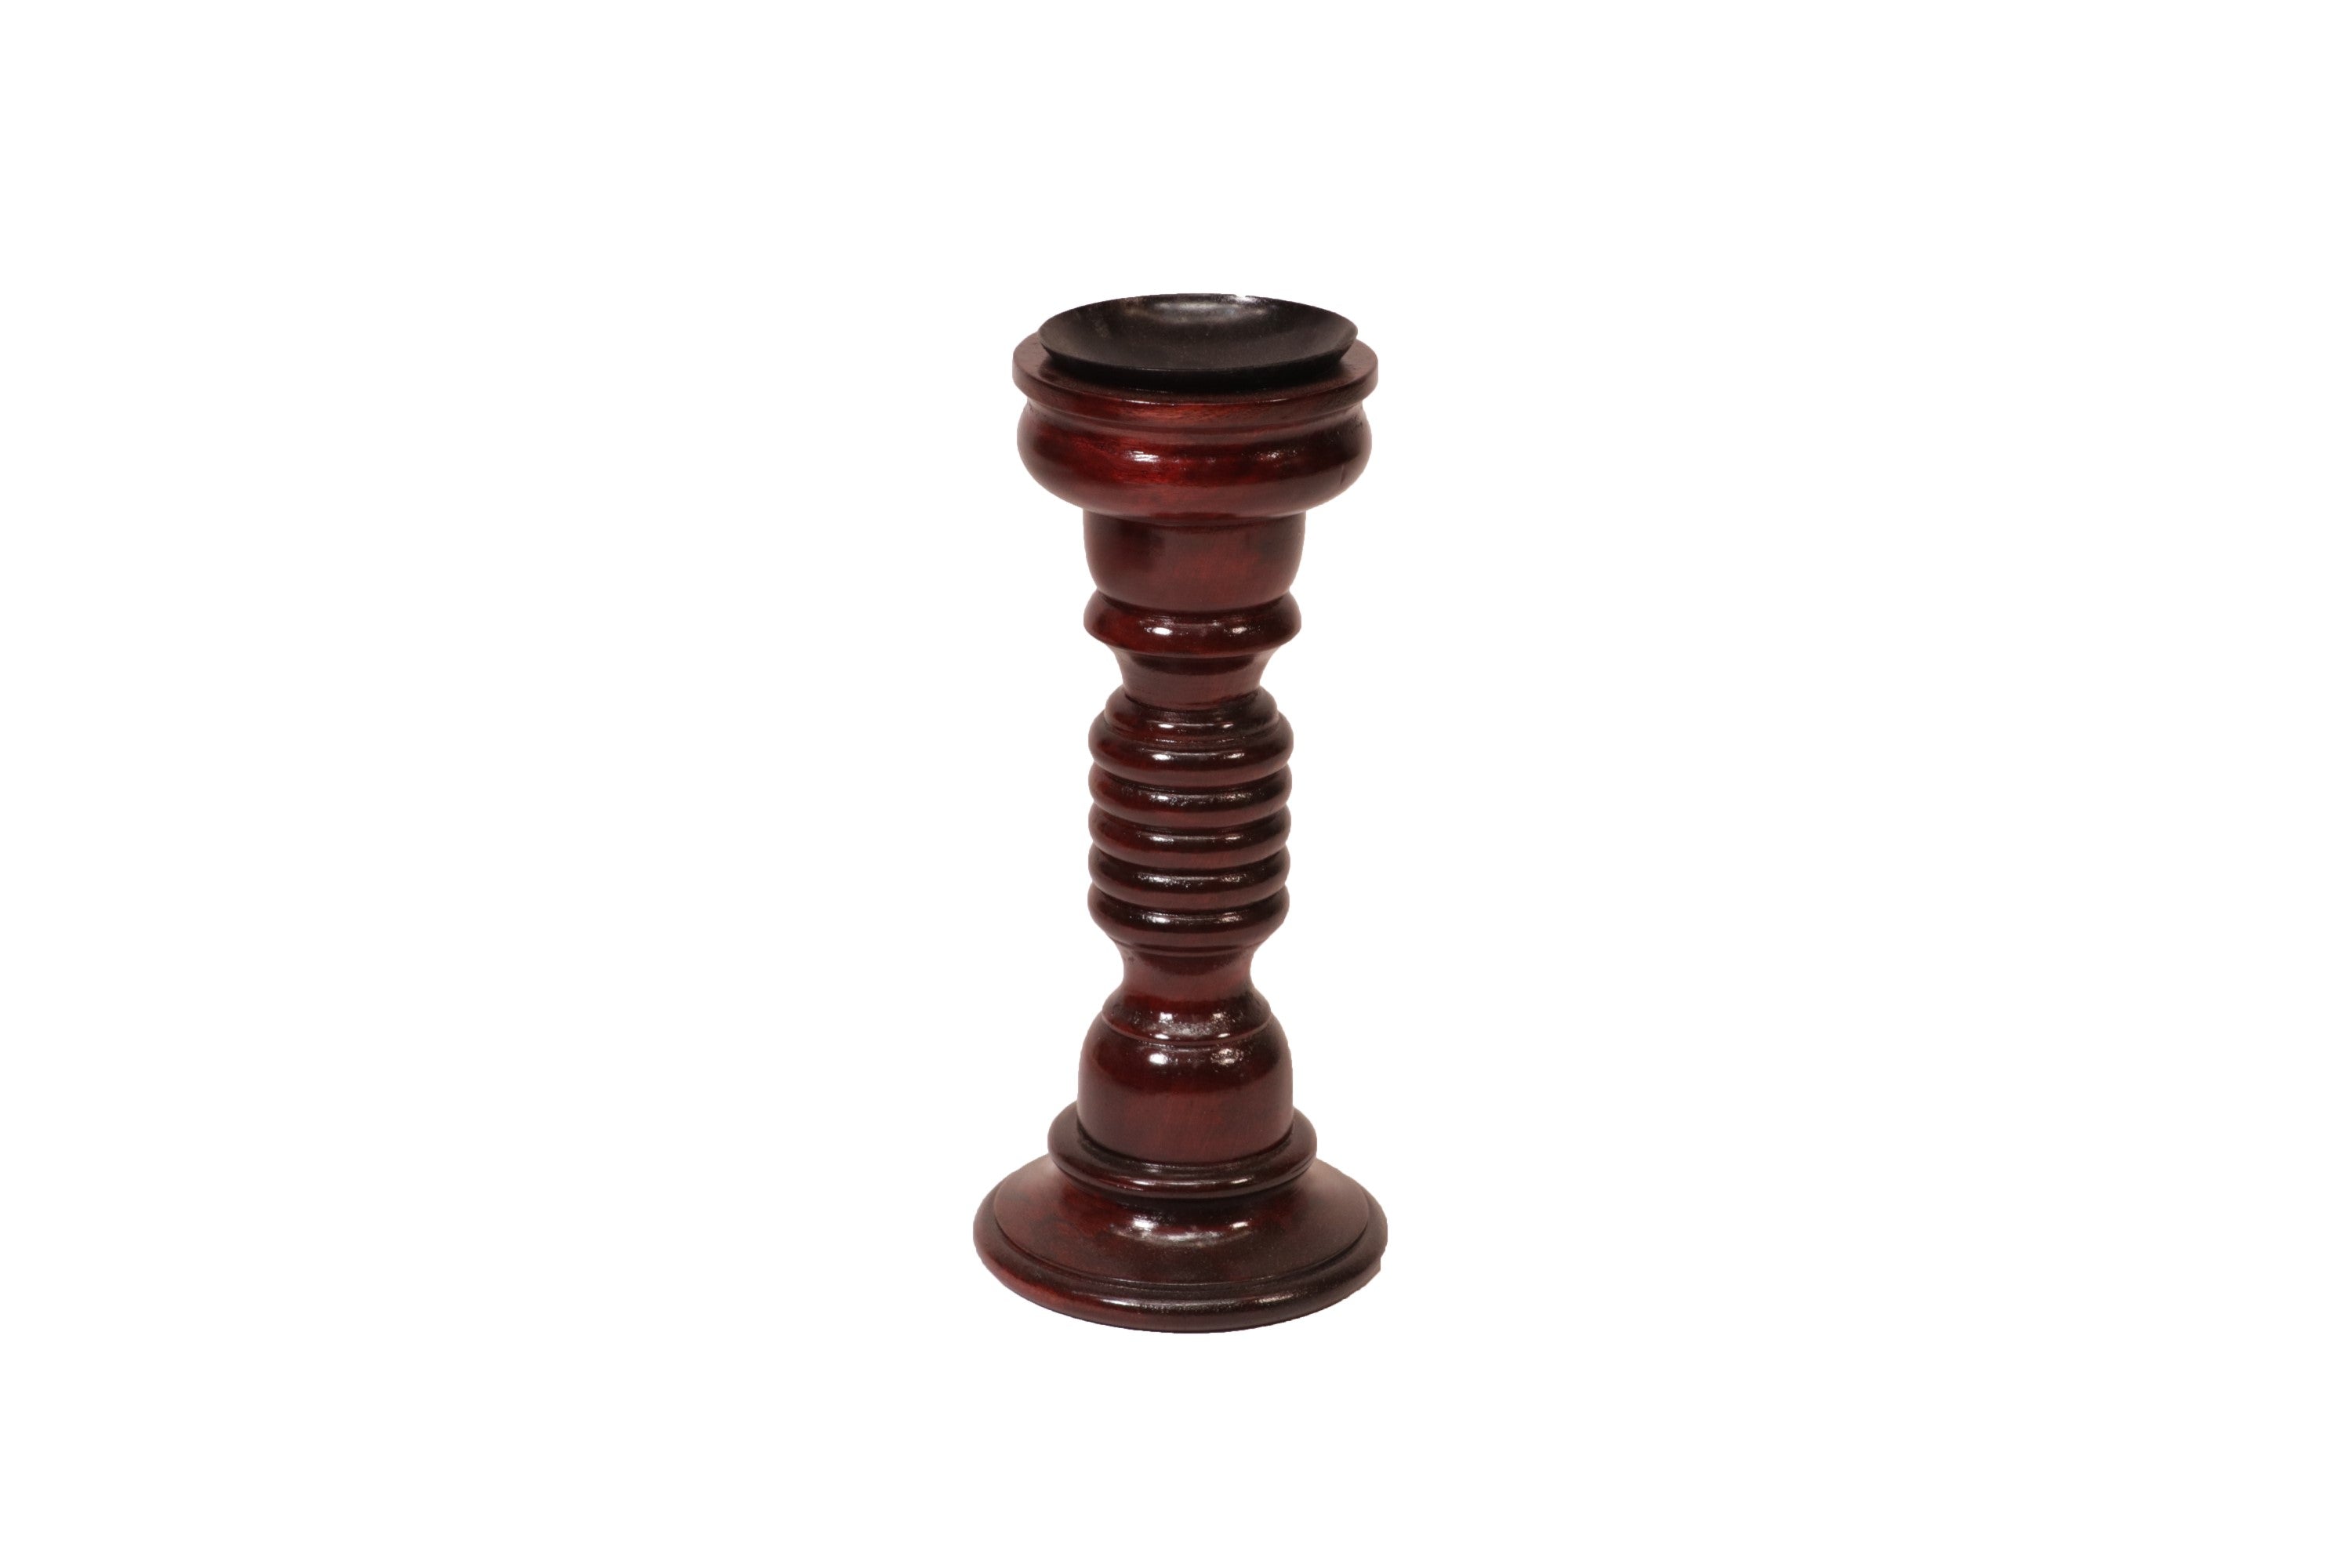 Wooden Risen Ring Candle Holder Large (5 x 5 x 15 Inch) Candle Holder